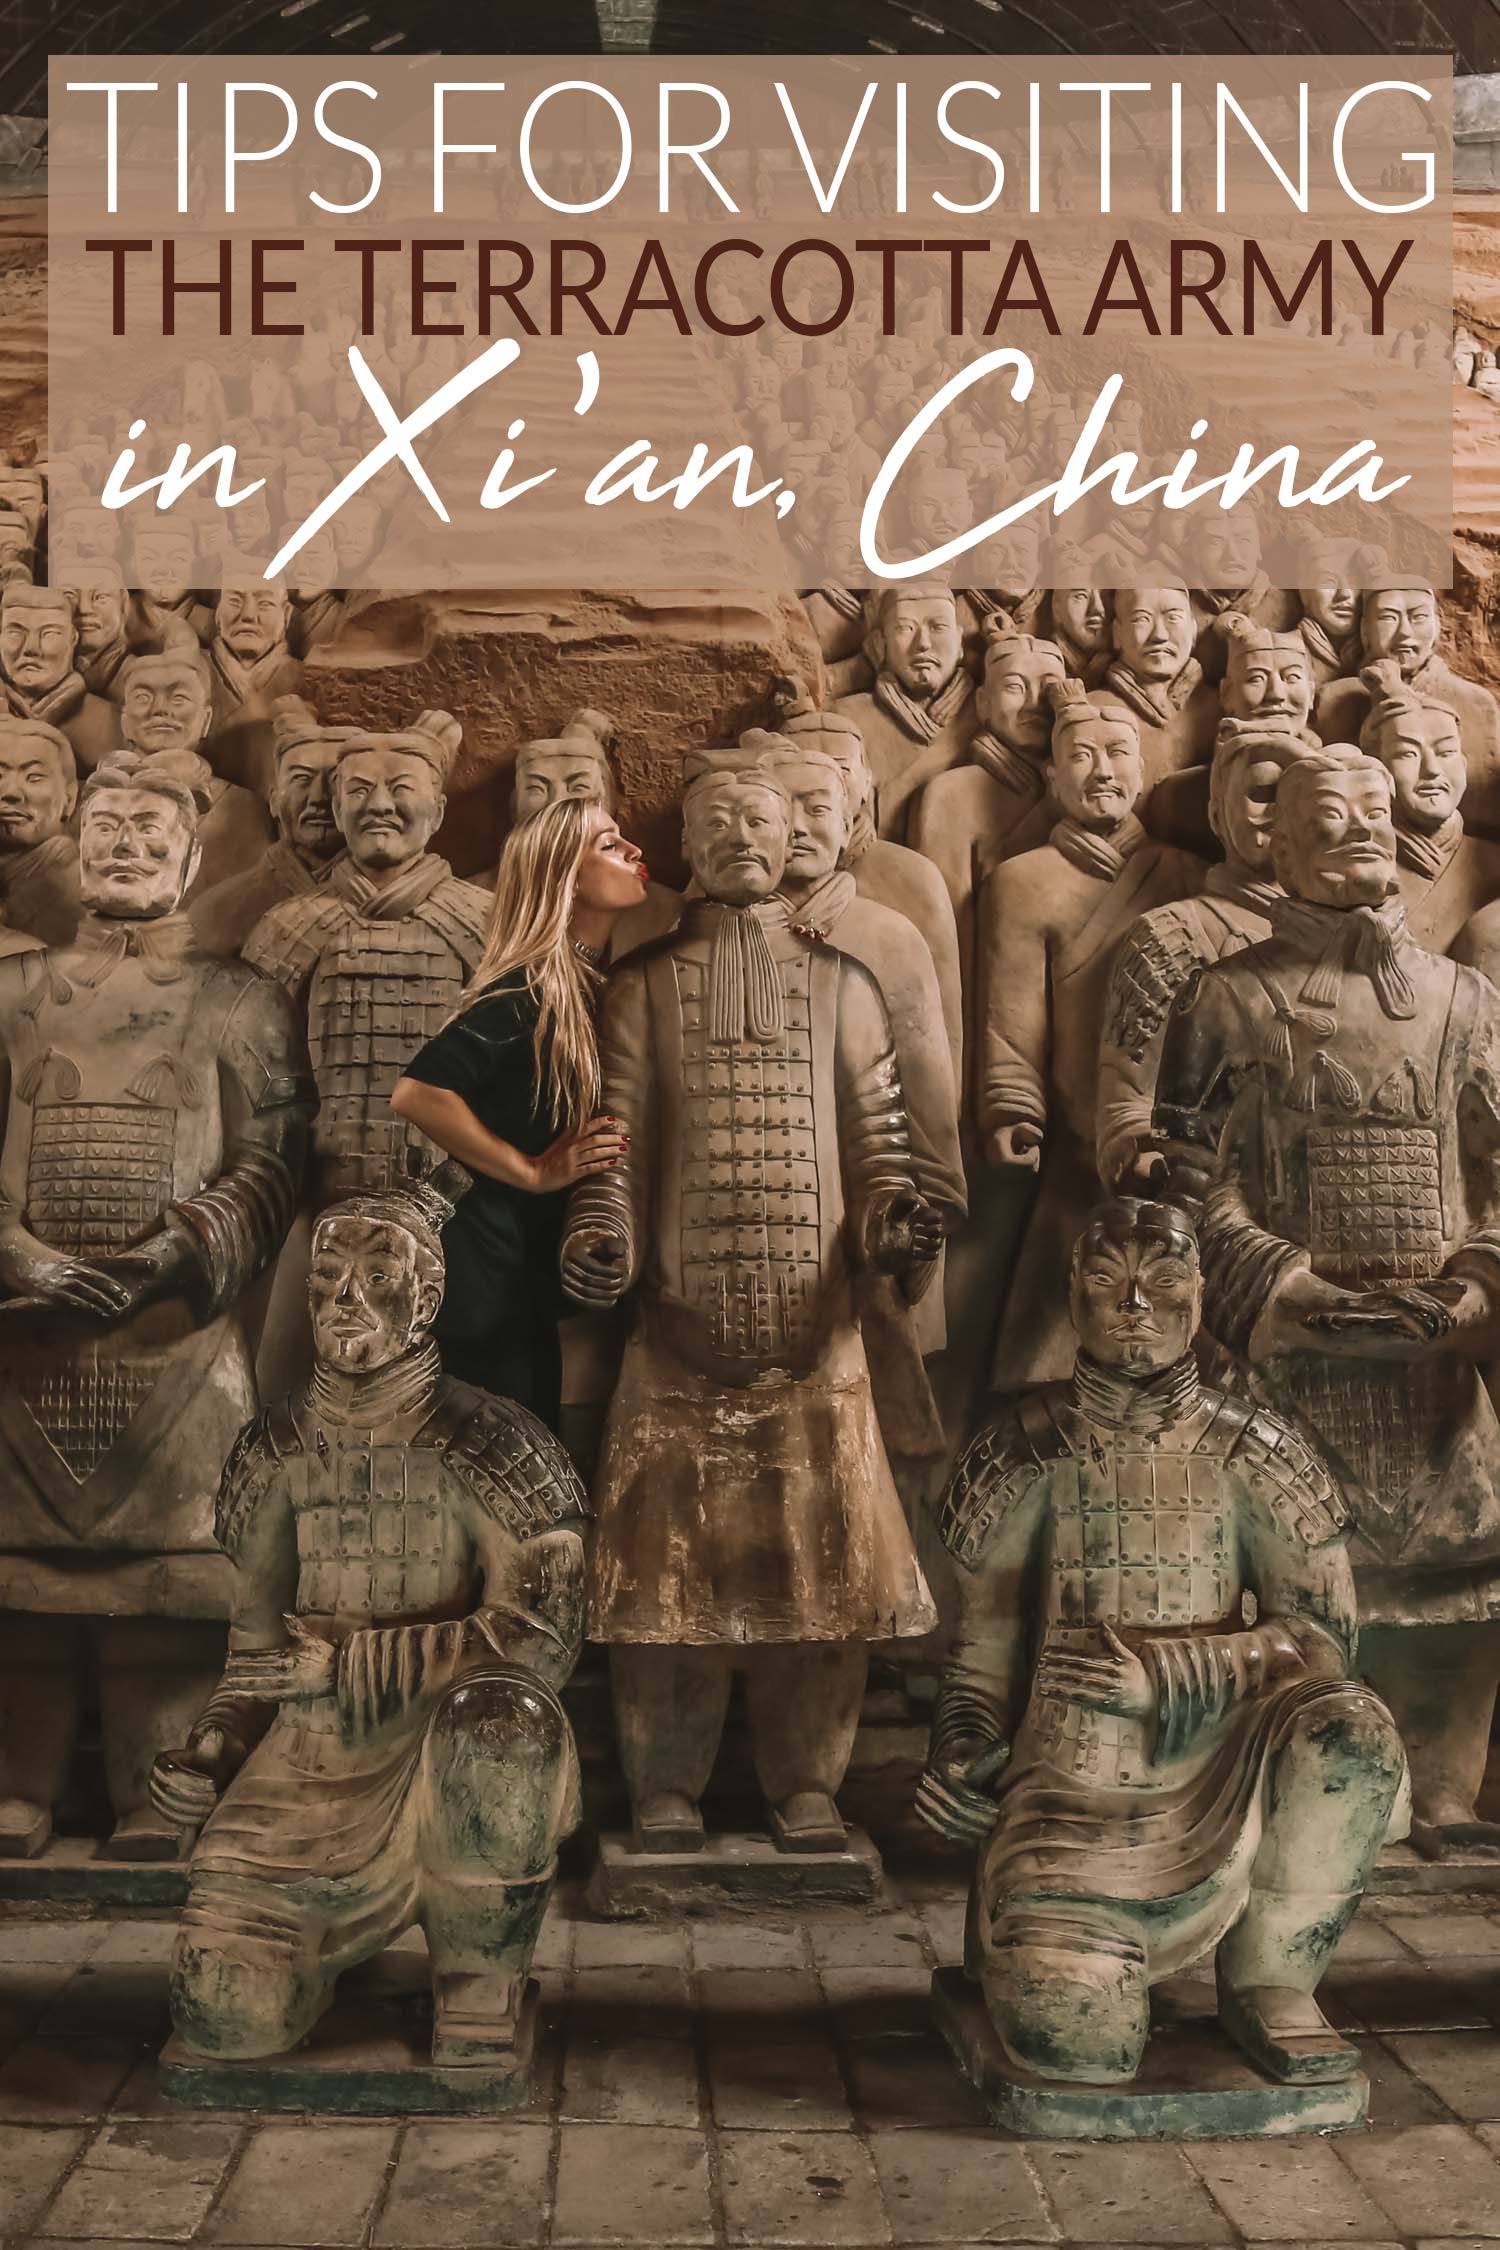 Tips for Visiting the Terracota Army in Xi'an China